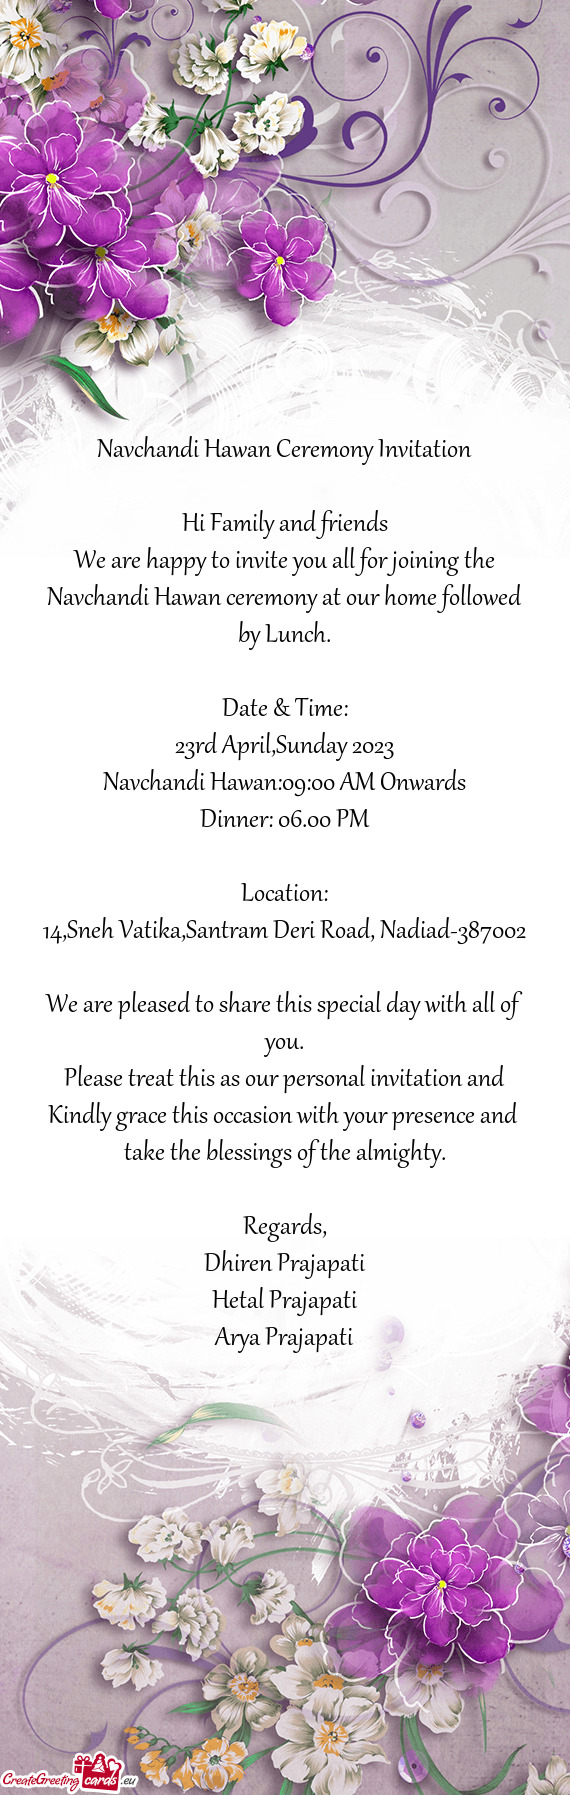 We are happy to invite you all for joining the Navchandi Hawan ceremony at our home followed by Lunc